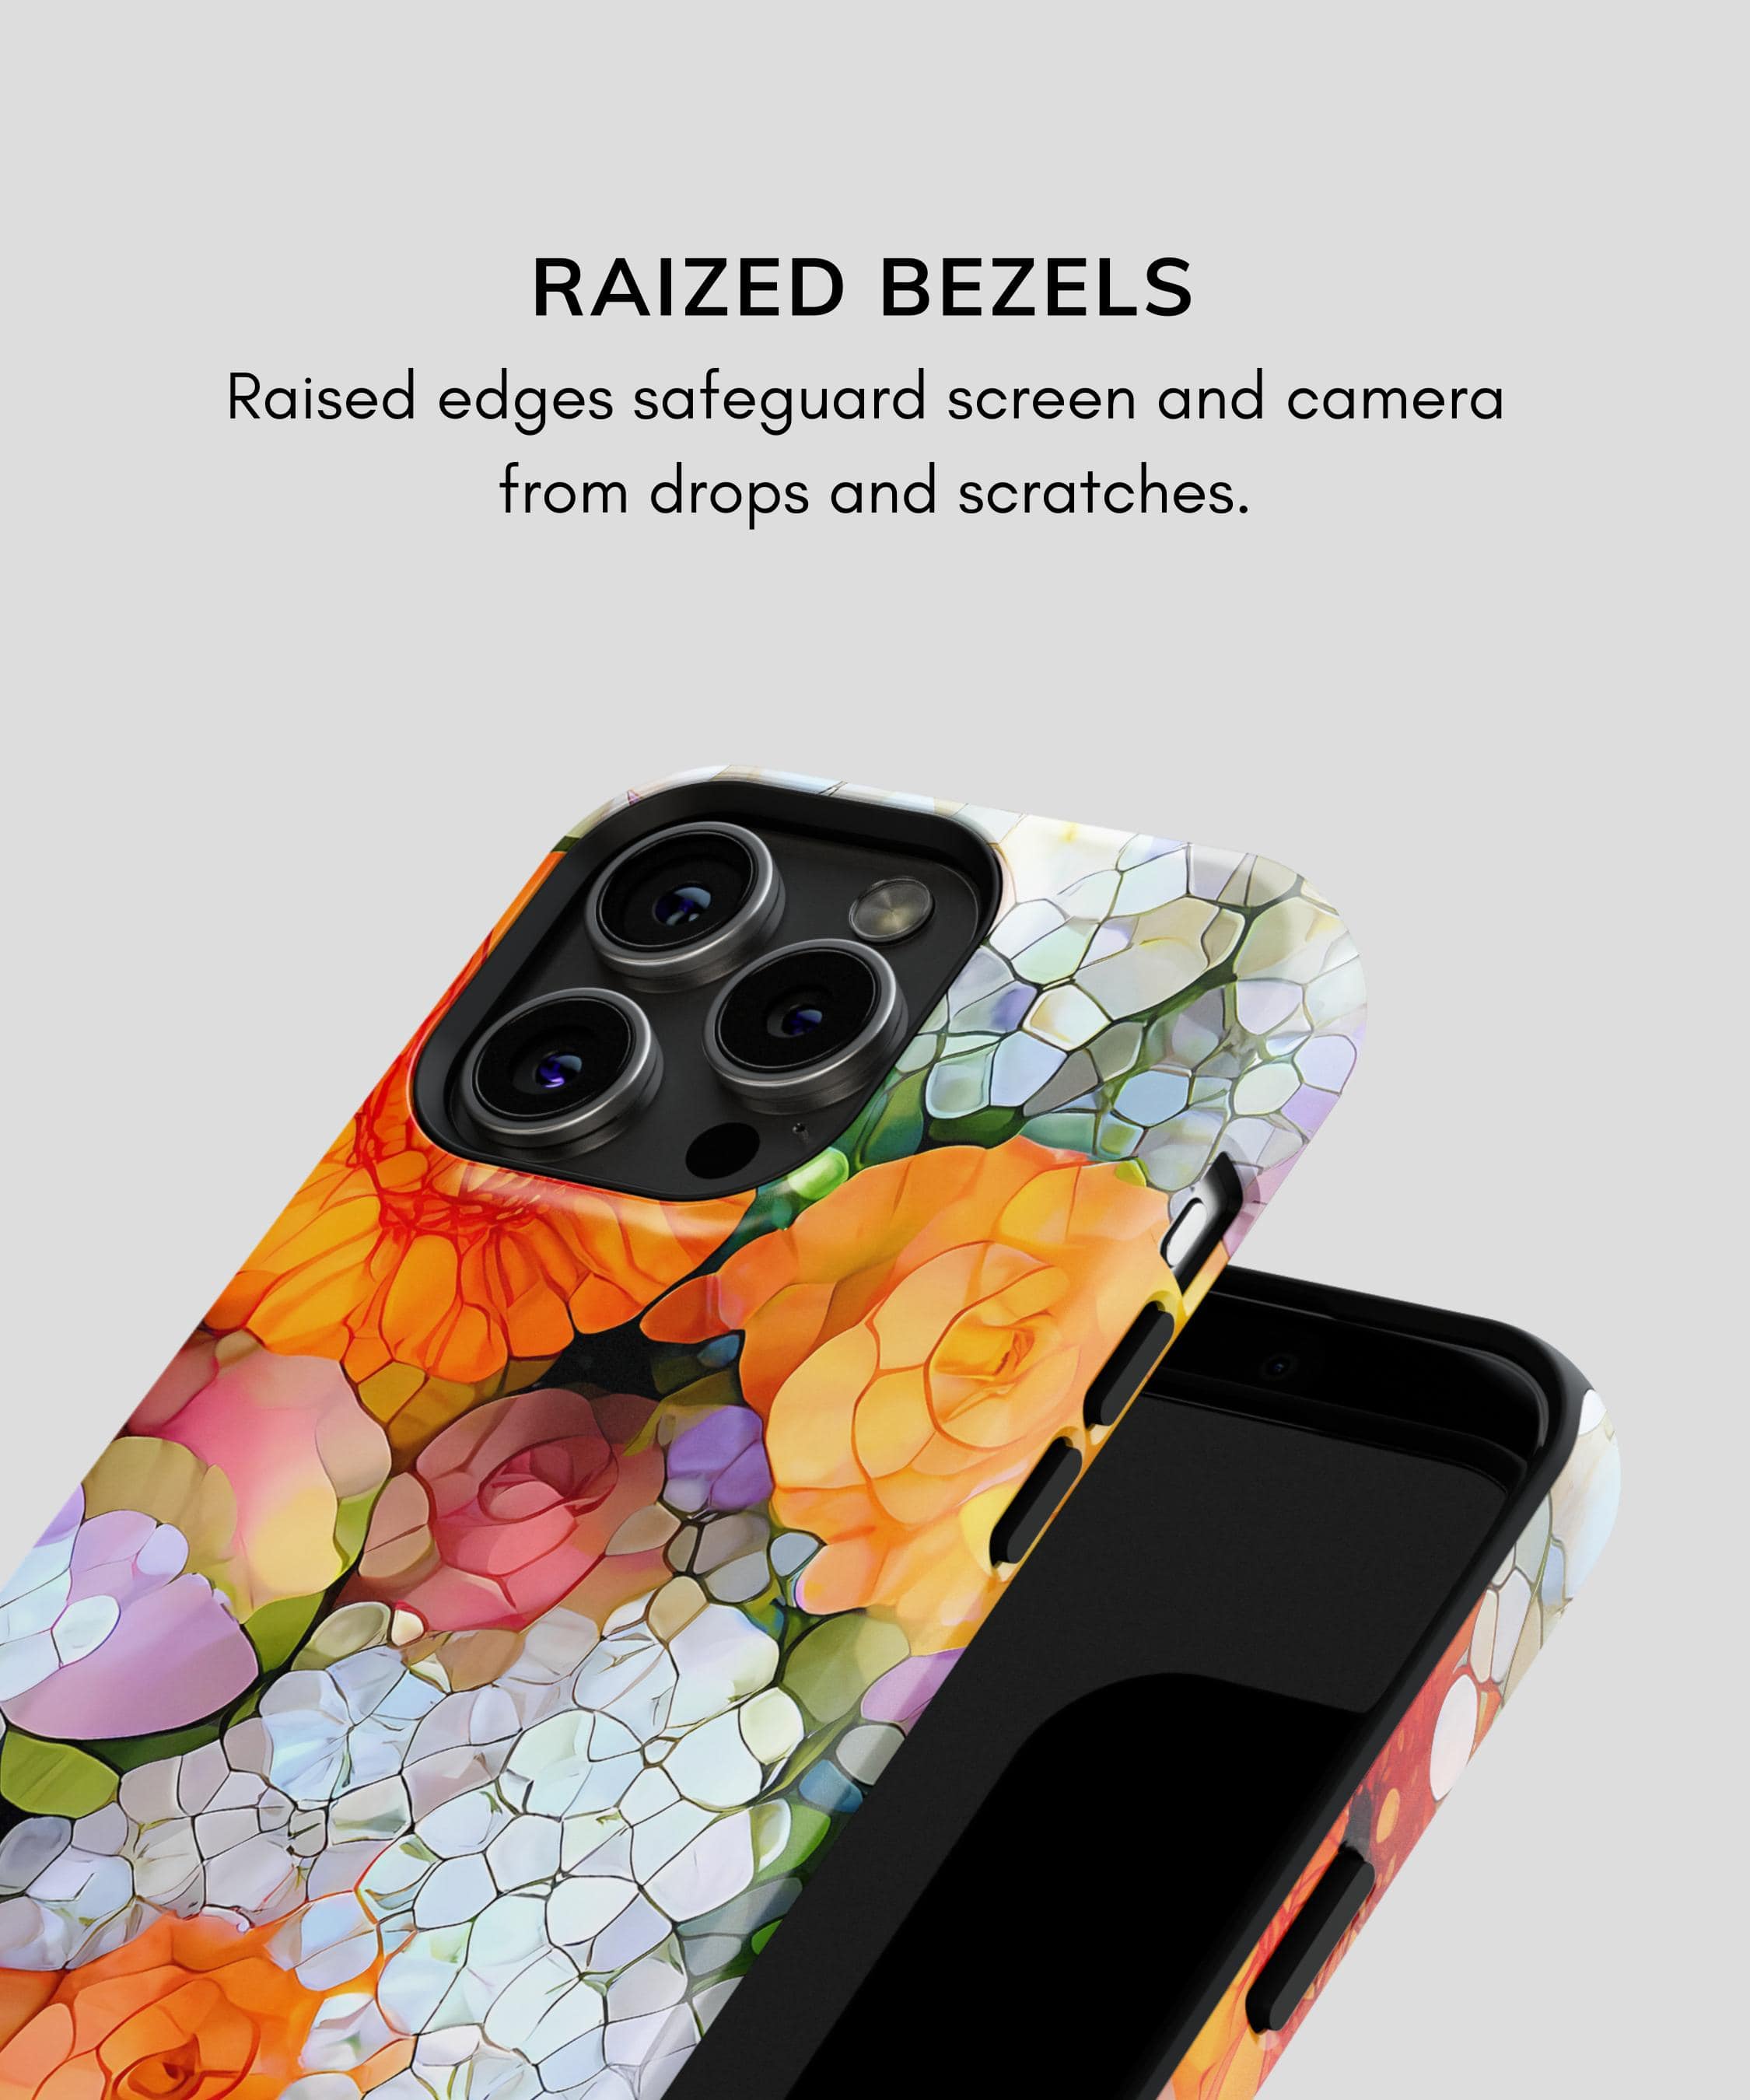 Colorful Phone Cases - Pretty Stone Art Flower iPhone Case